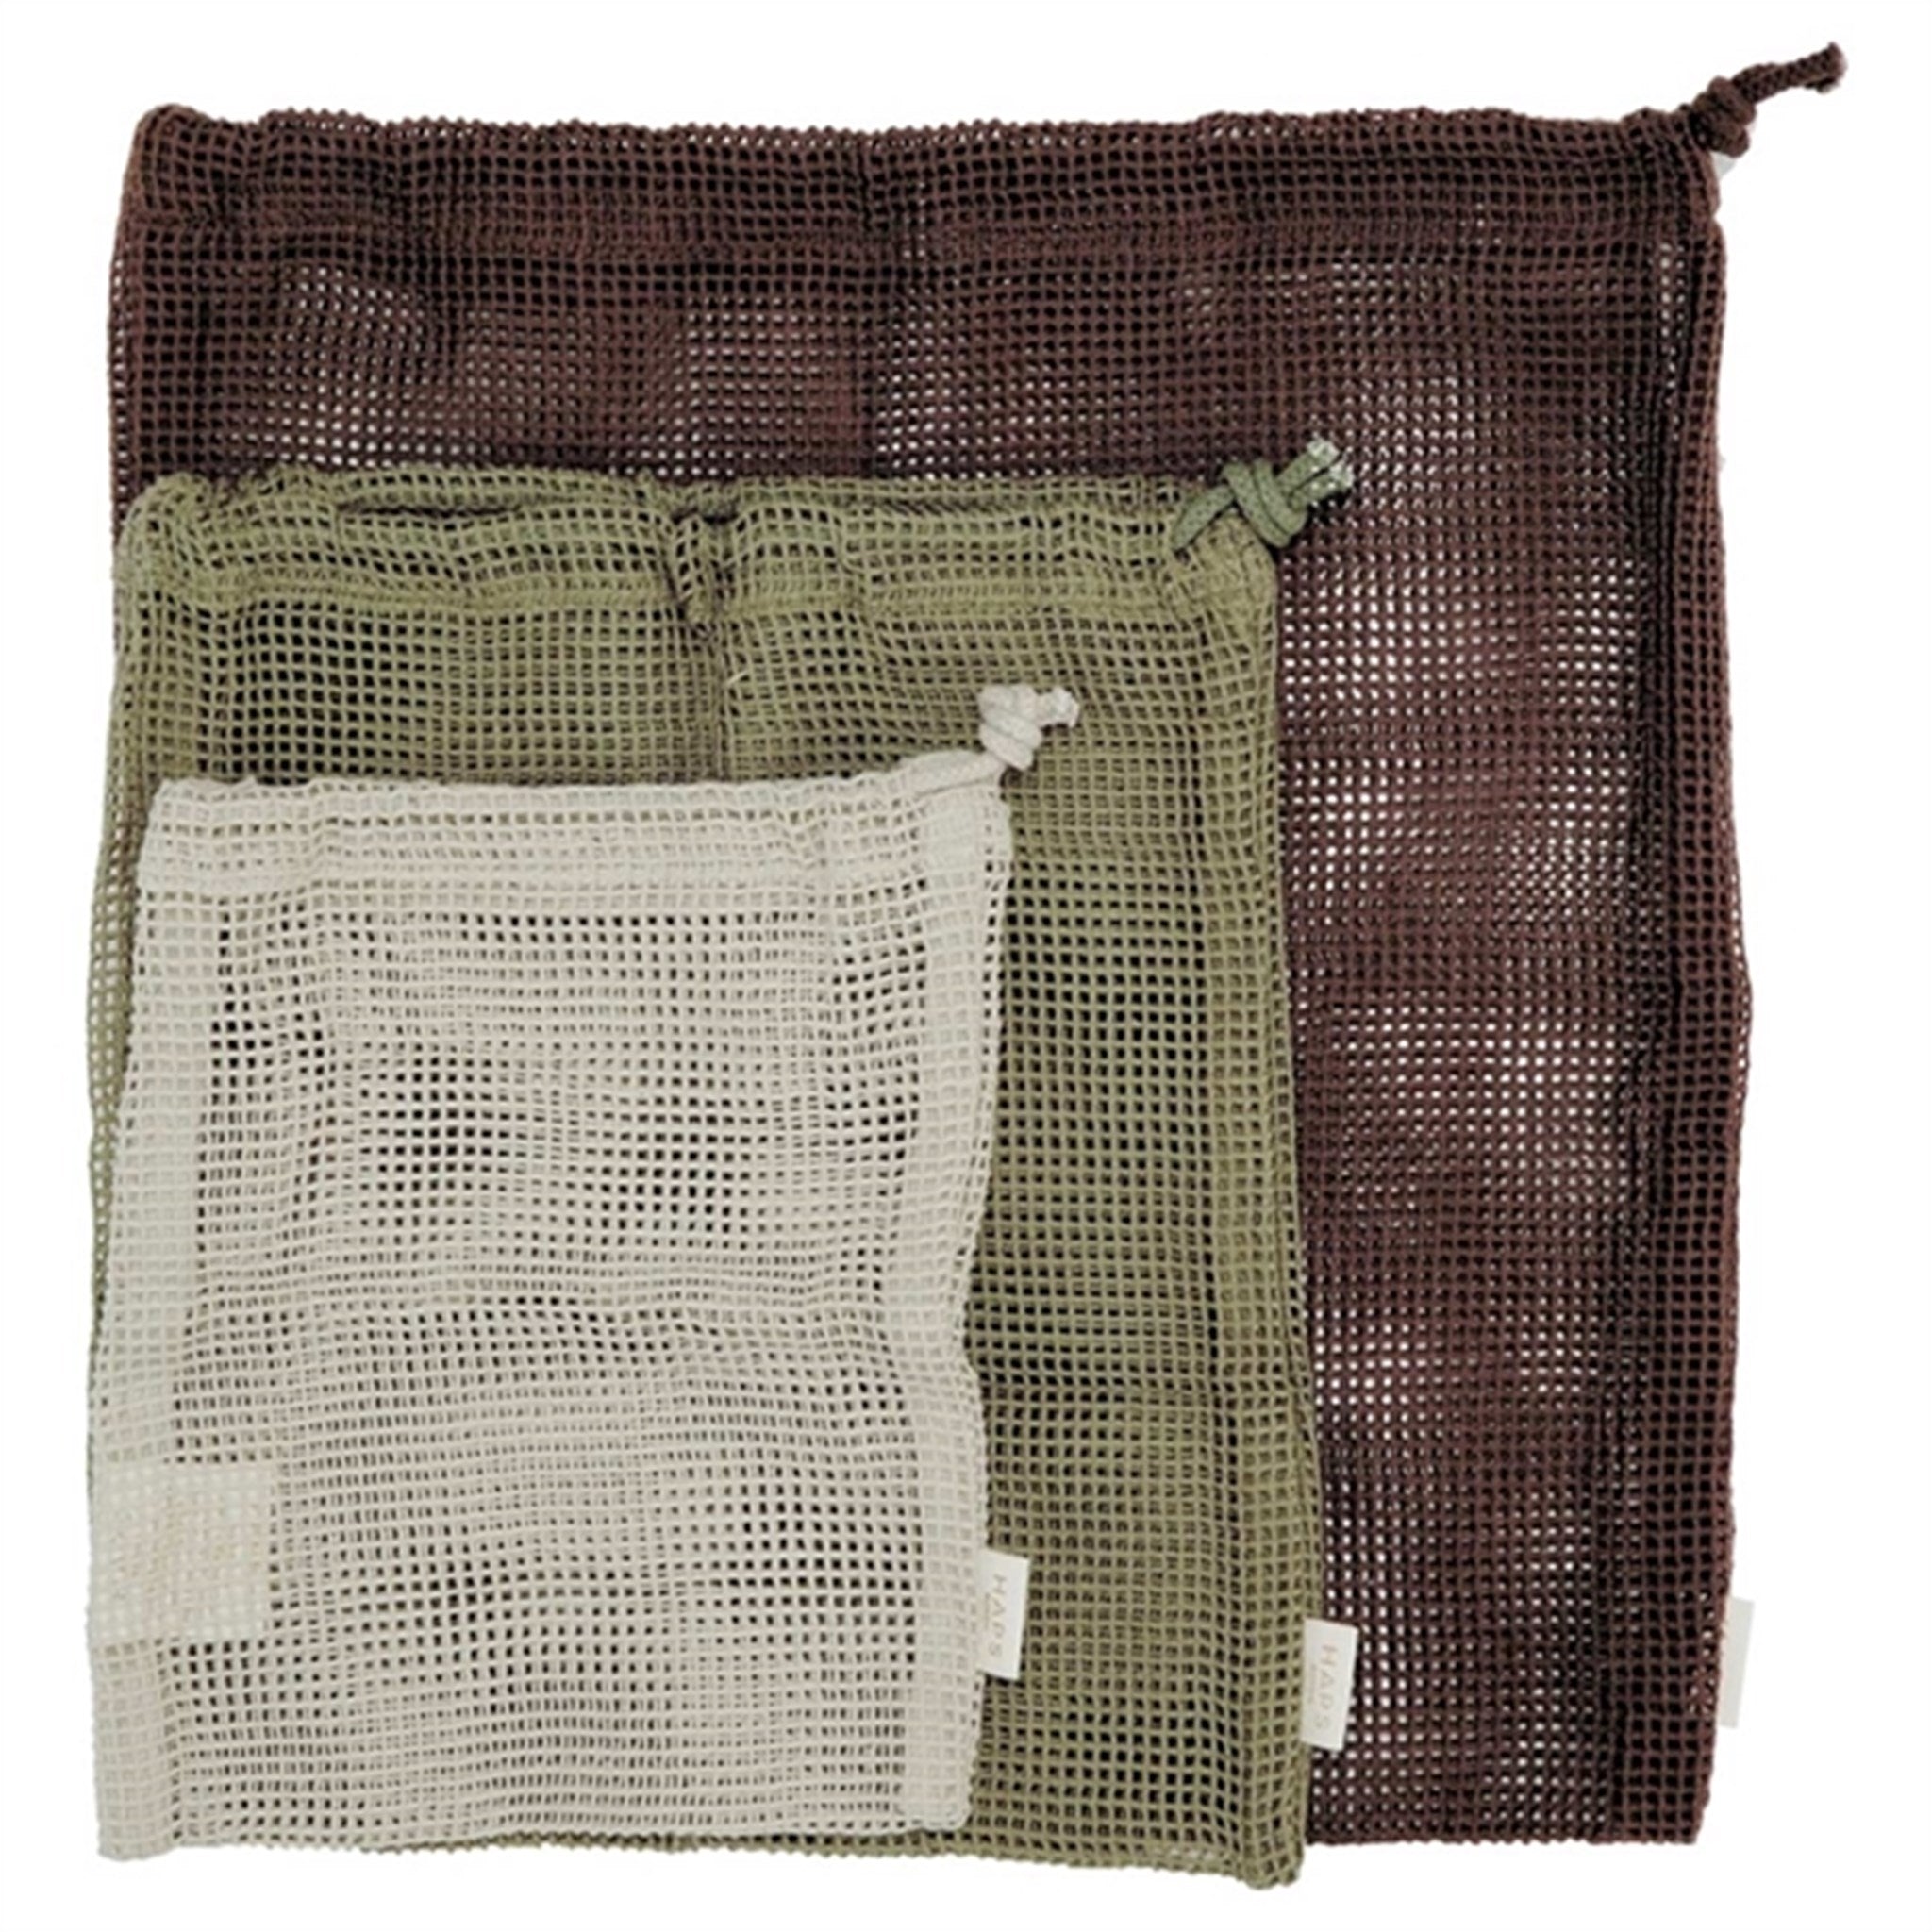 Haps Nordic Mesh Bags 3-pack Forest Mix